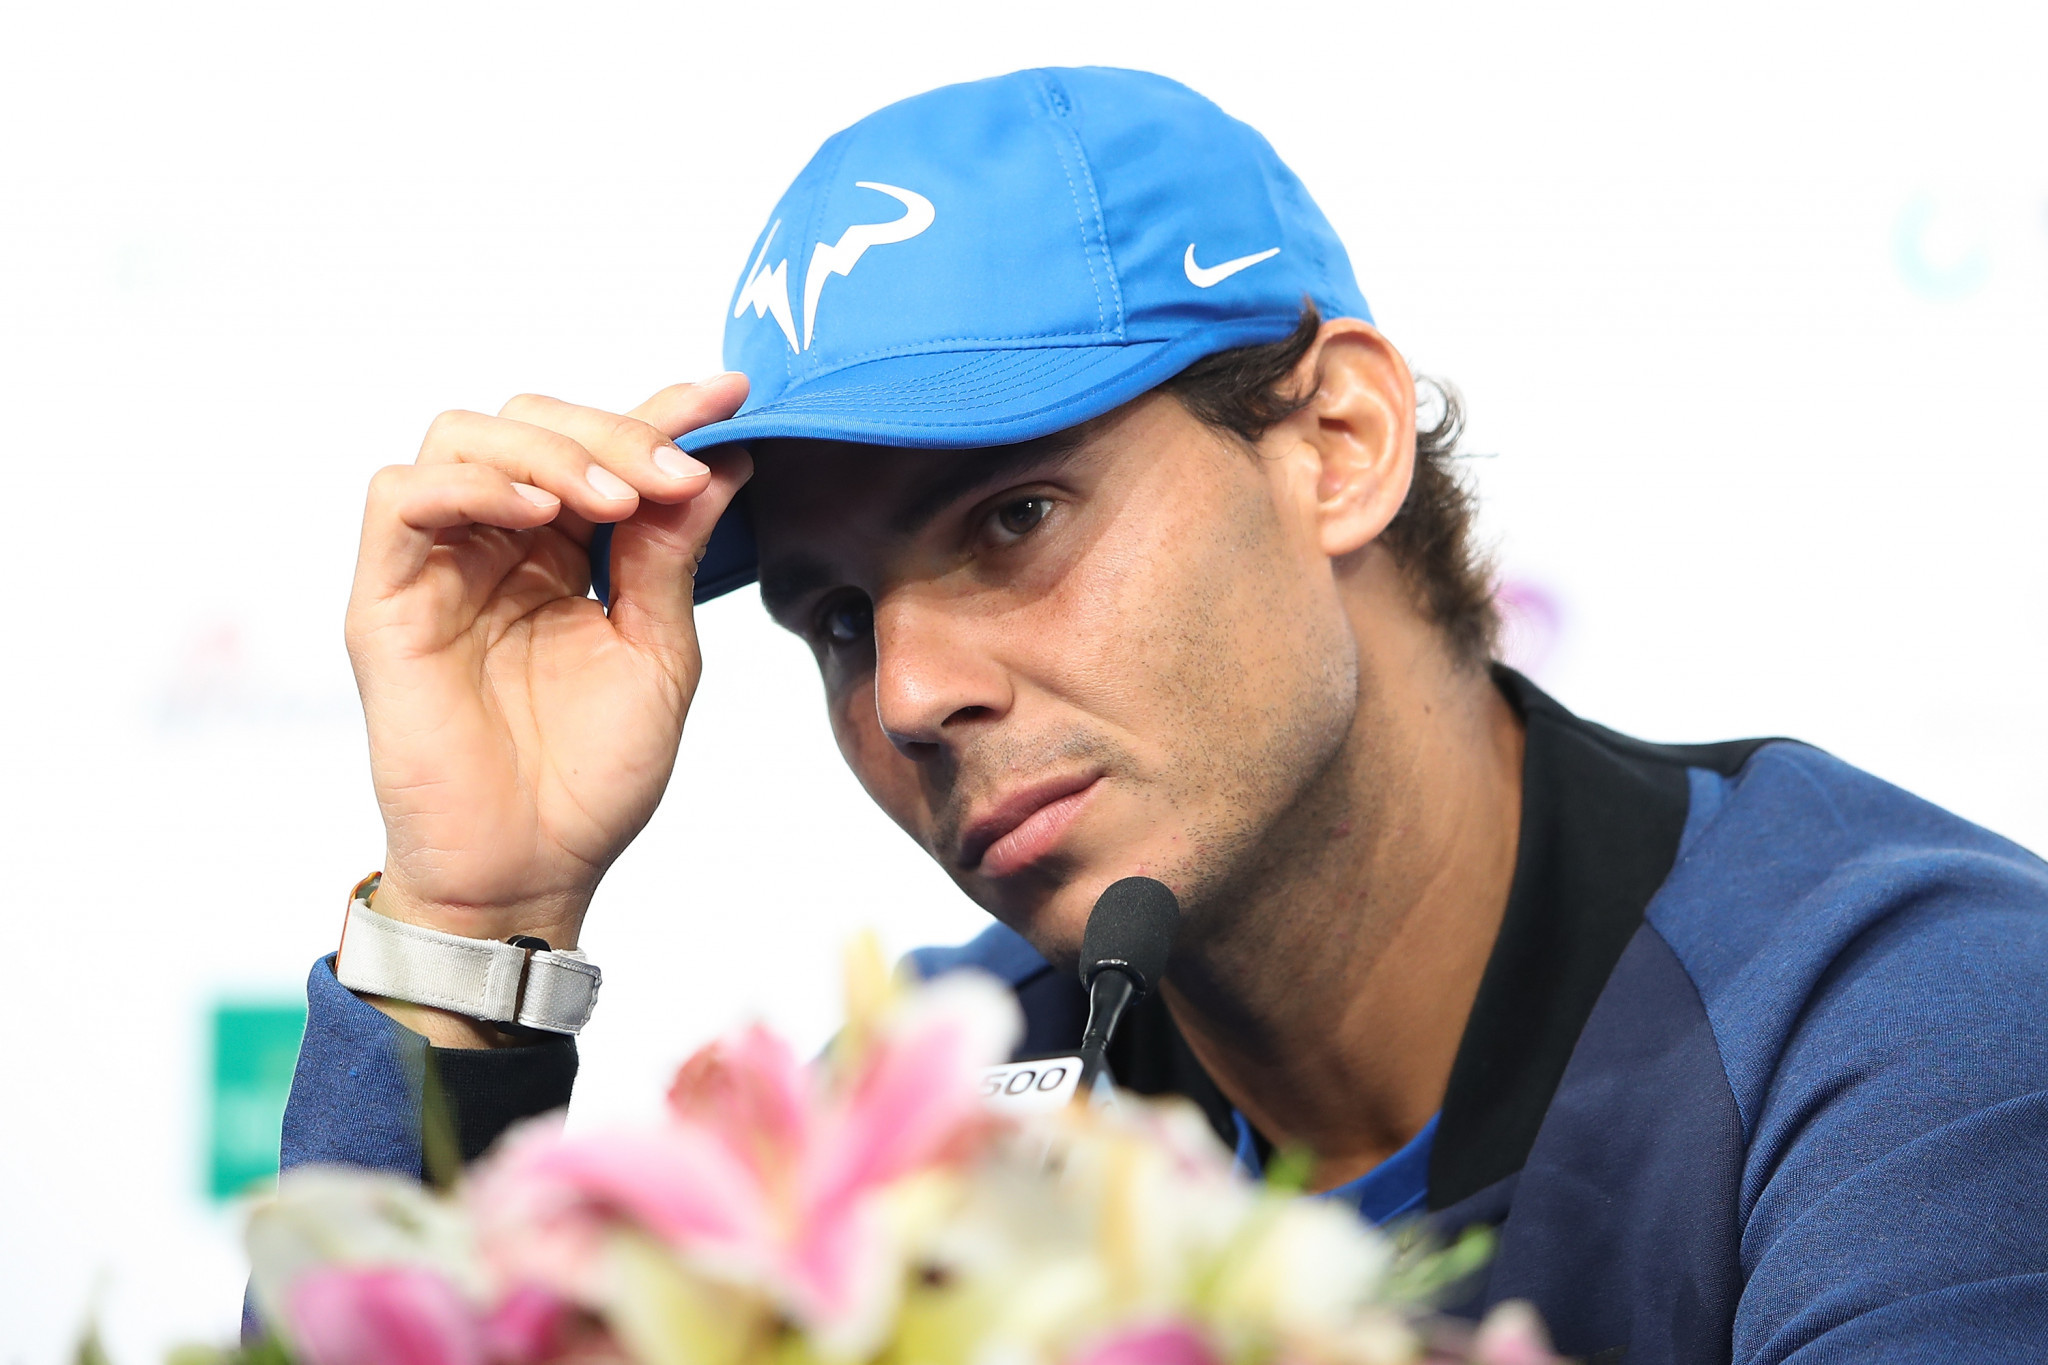 Nadal "disheartened and upset" by violence in Catalonia amid referendum chaos